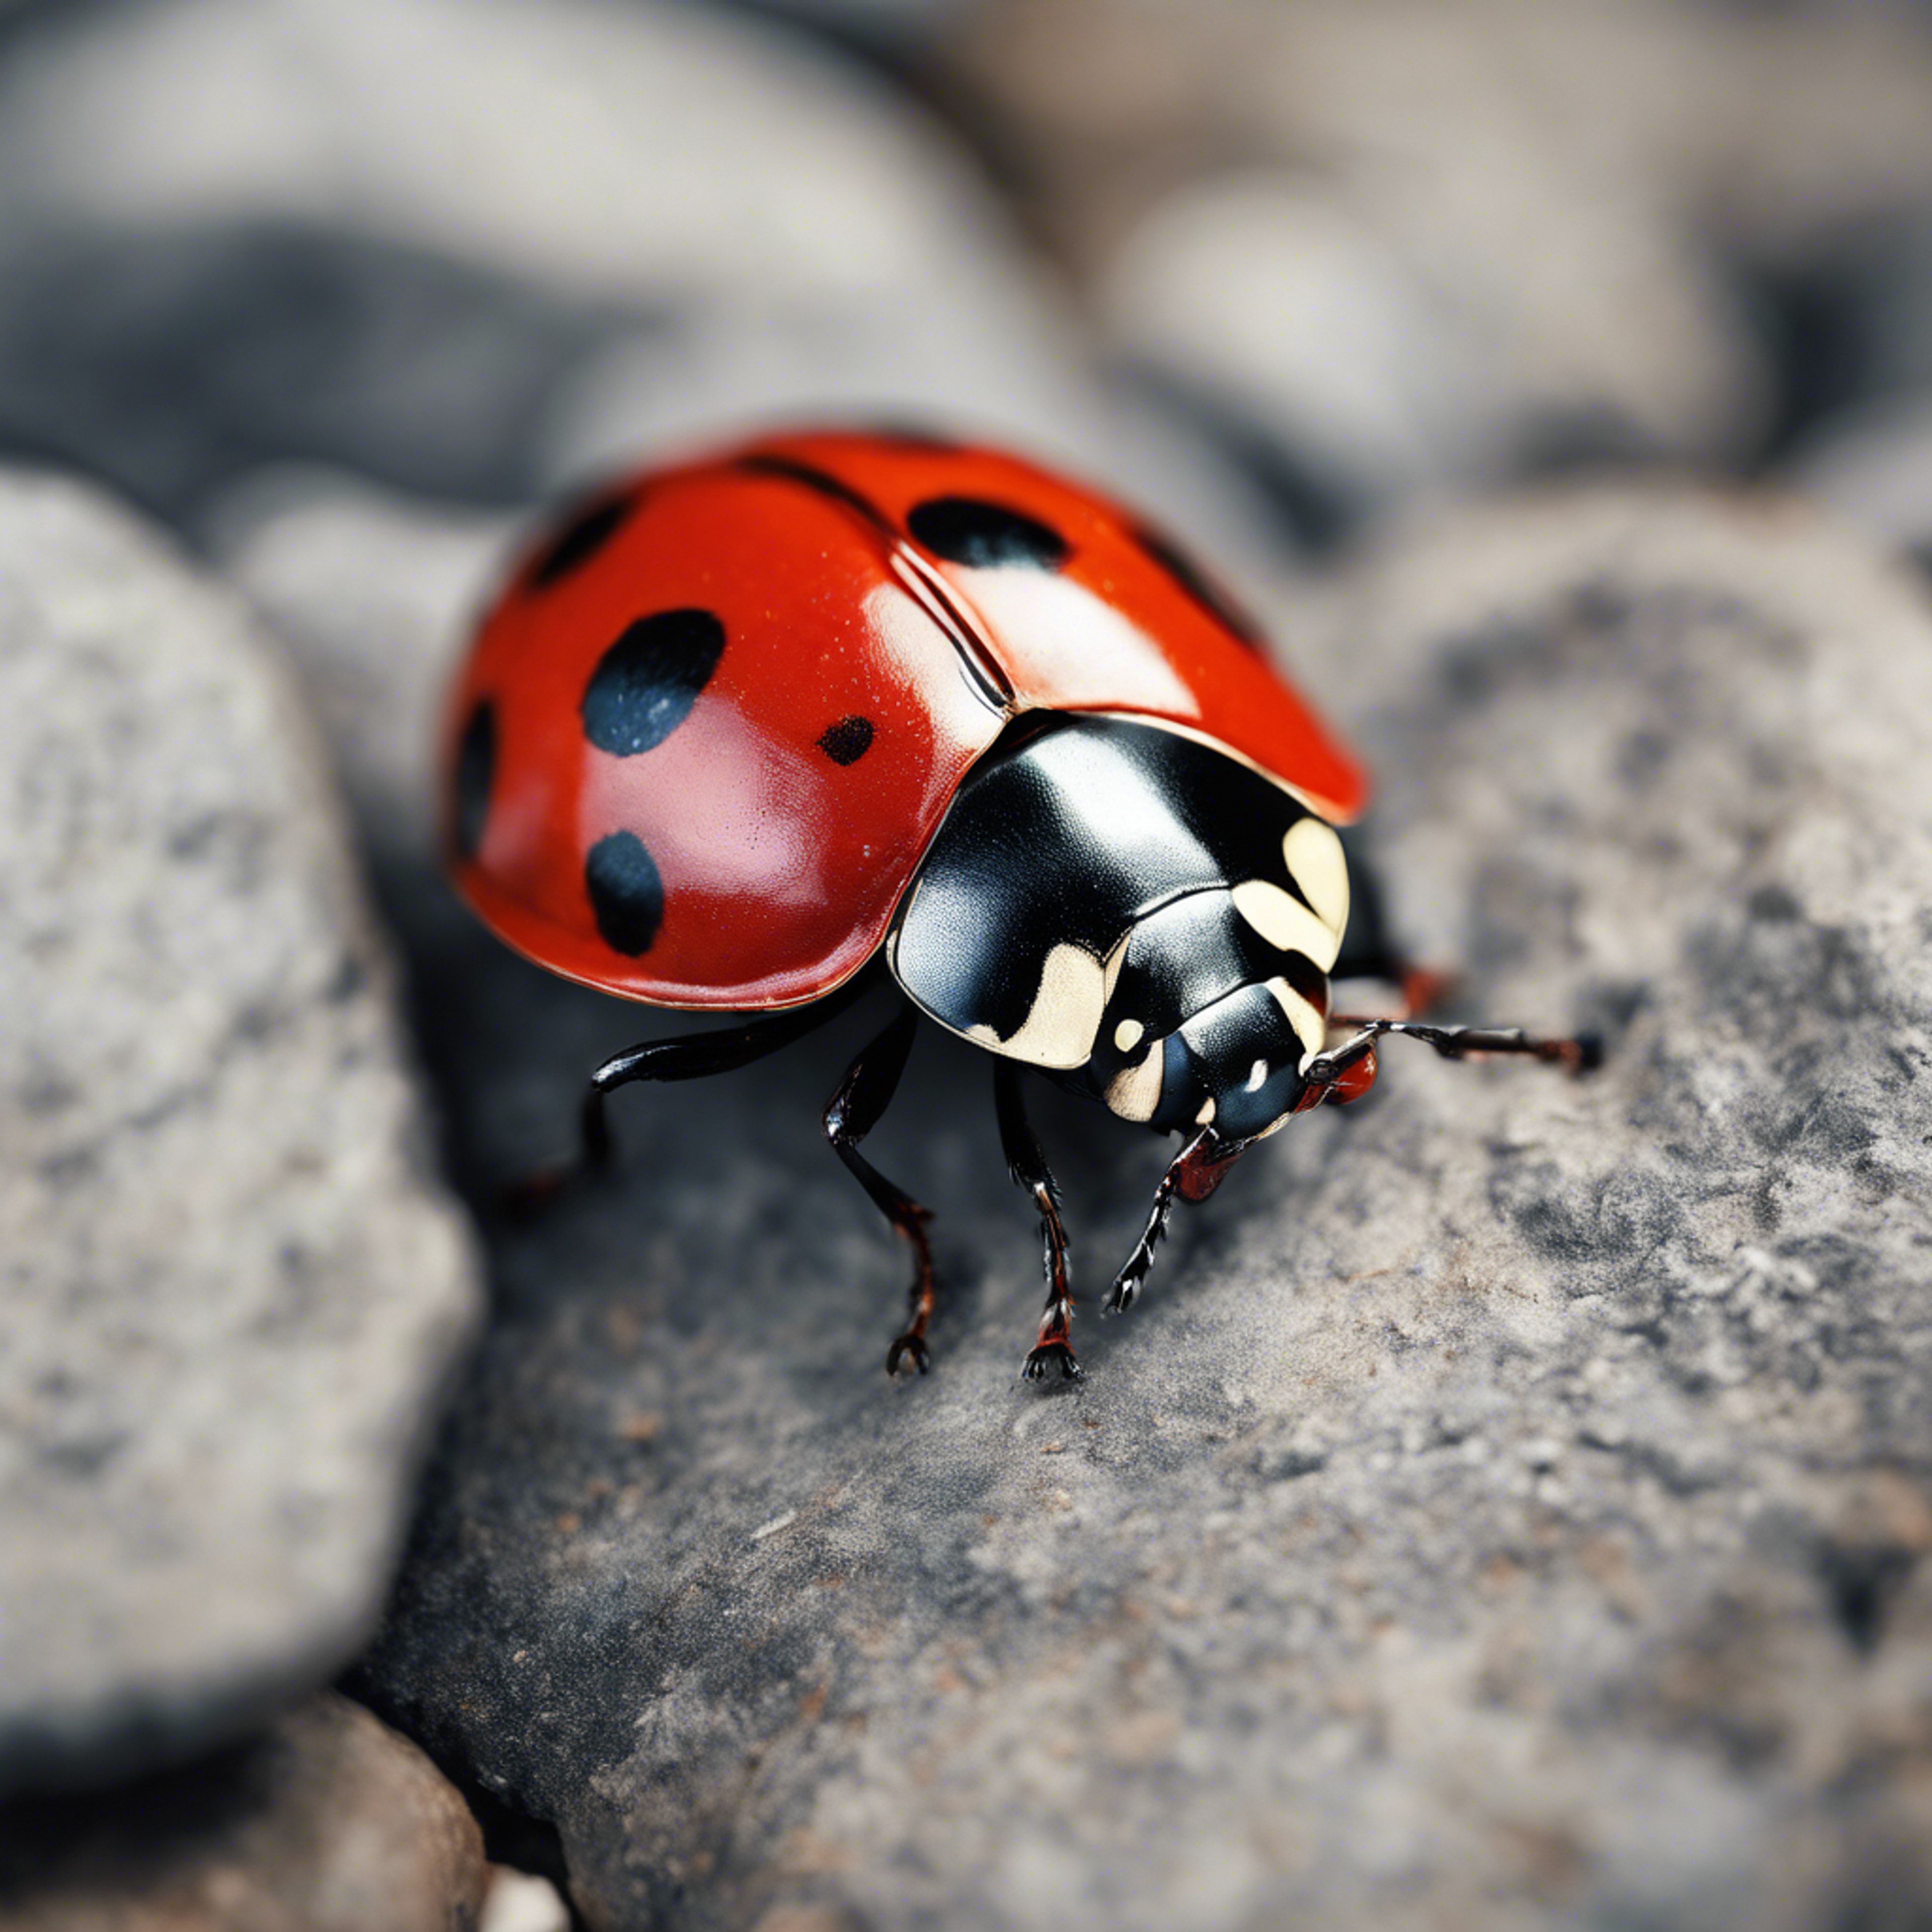 A fearless ladybug with bright red wings crawling over a dull, grey stone.壁紙[cb02e673ce6f479eab40]